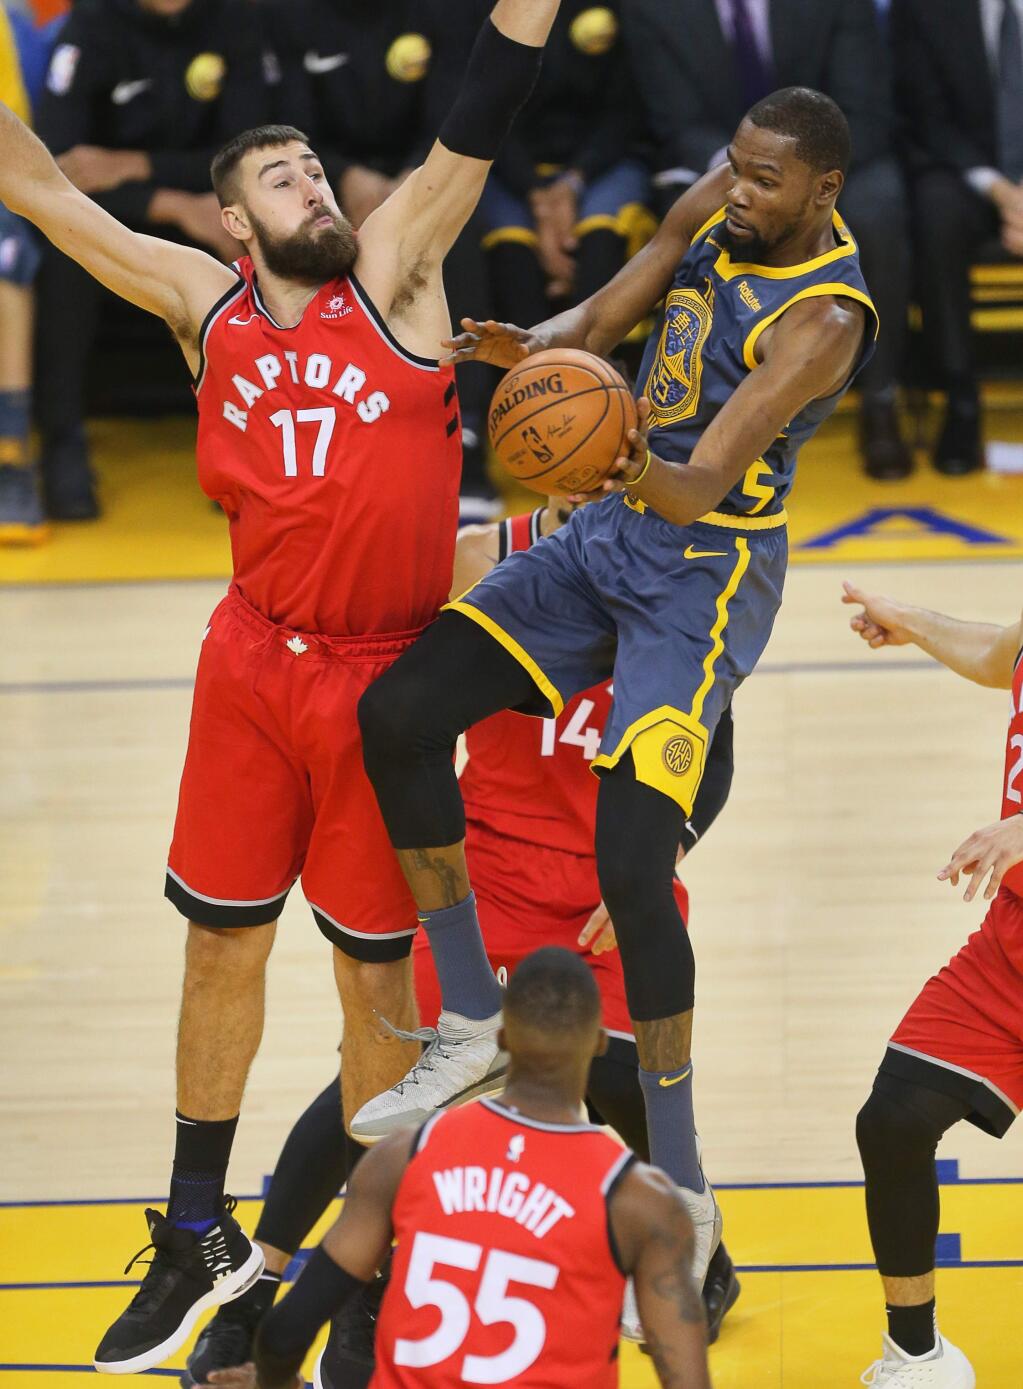 Warriors forward Kevin Durant passes the ball around Raptors center Jonas Valanciunas during their game in Oakland on Wednesday, Dec. 12, 2018. (Christopher Chung / The Press Democrat)